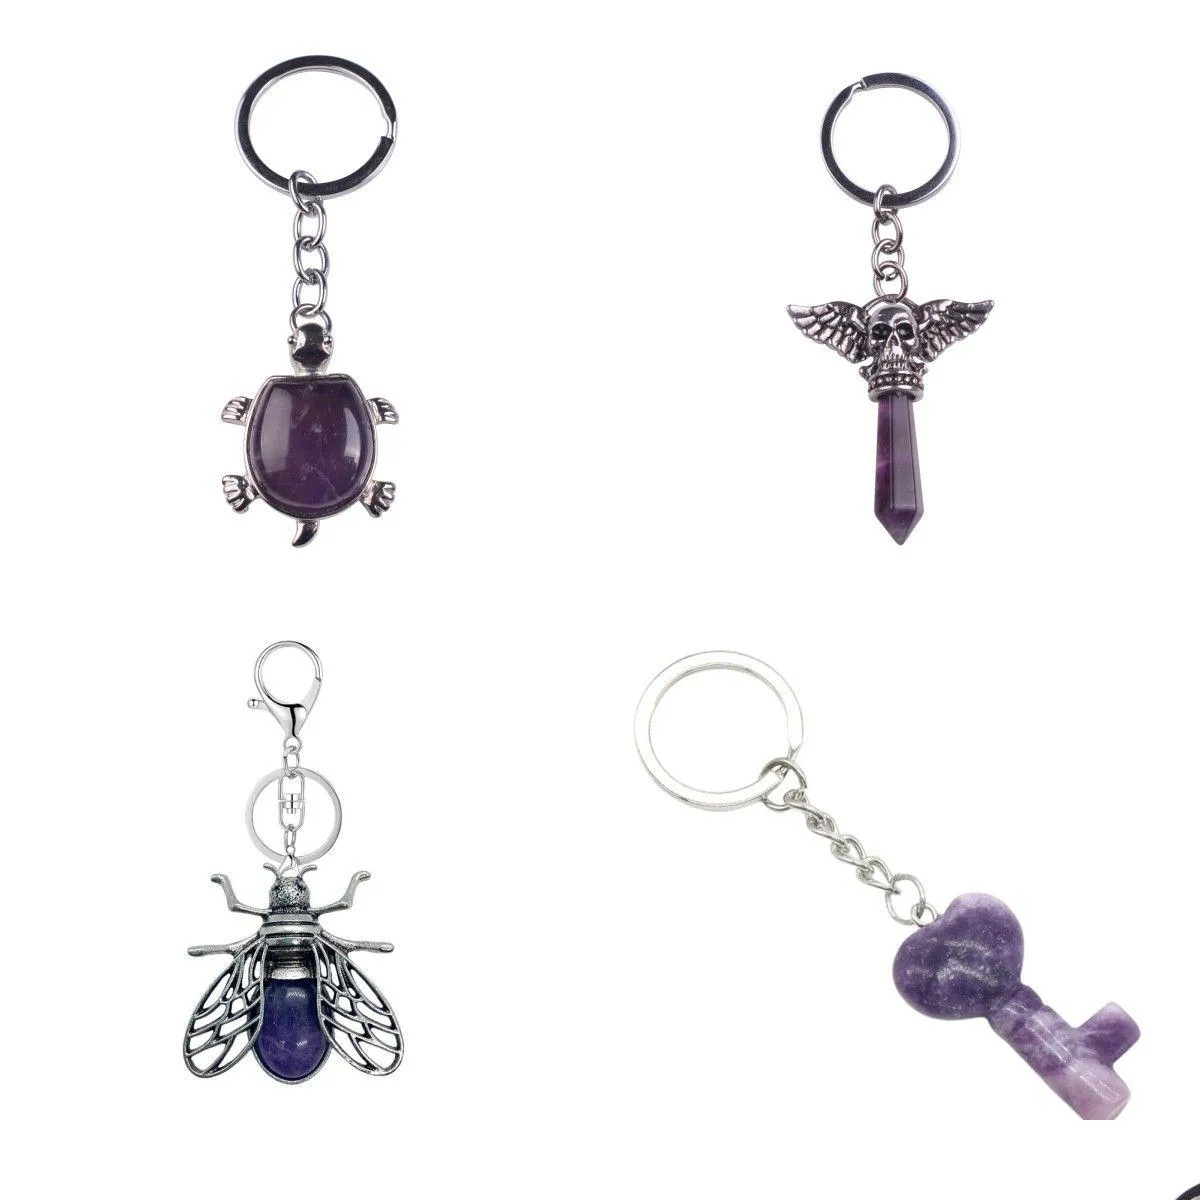 wholesale natural amethyst gemstone keychain copper fashion turtle dragon charms key ring for women men gift